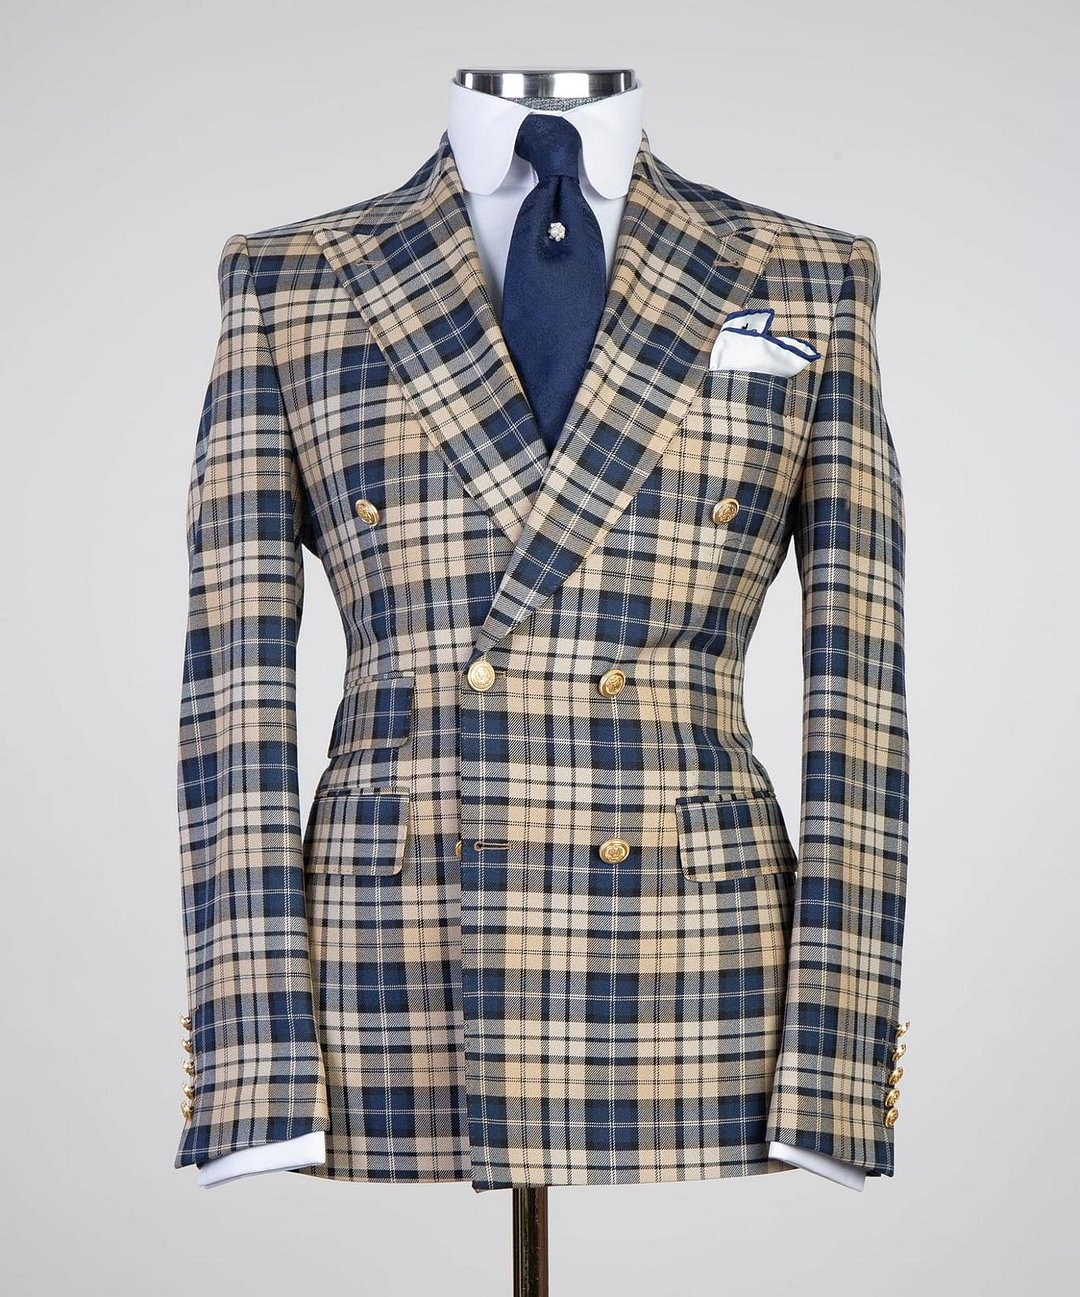 Men's navy blue and brown plaid 2pcs double breasted suit.